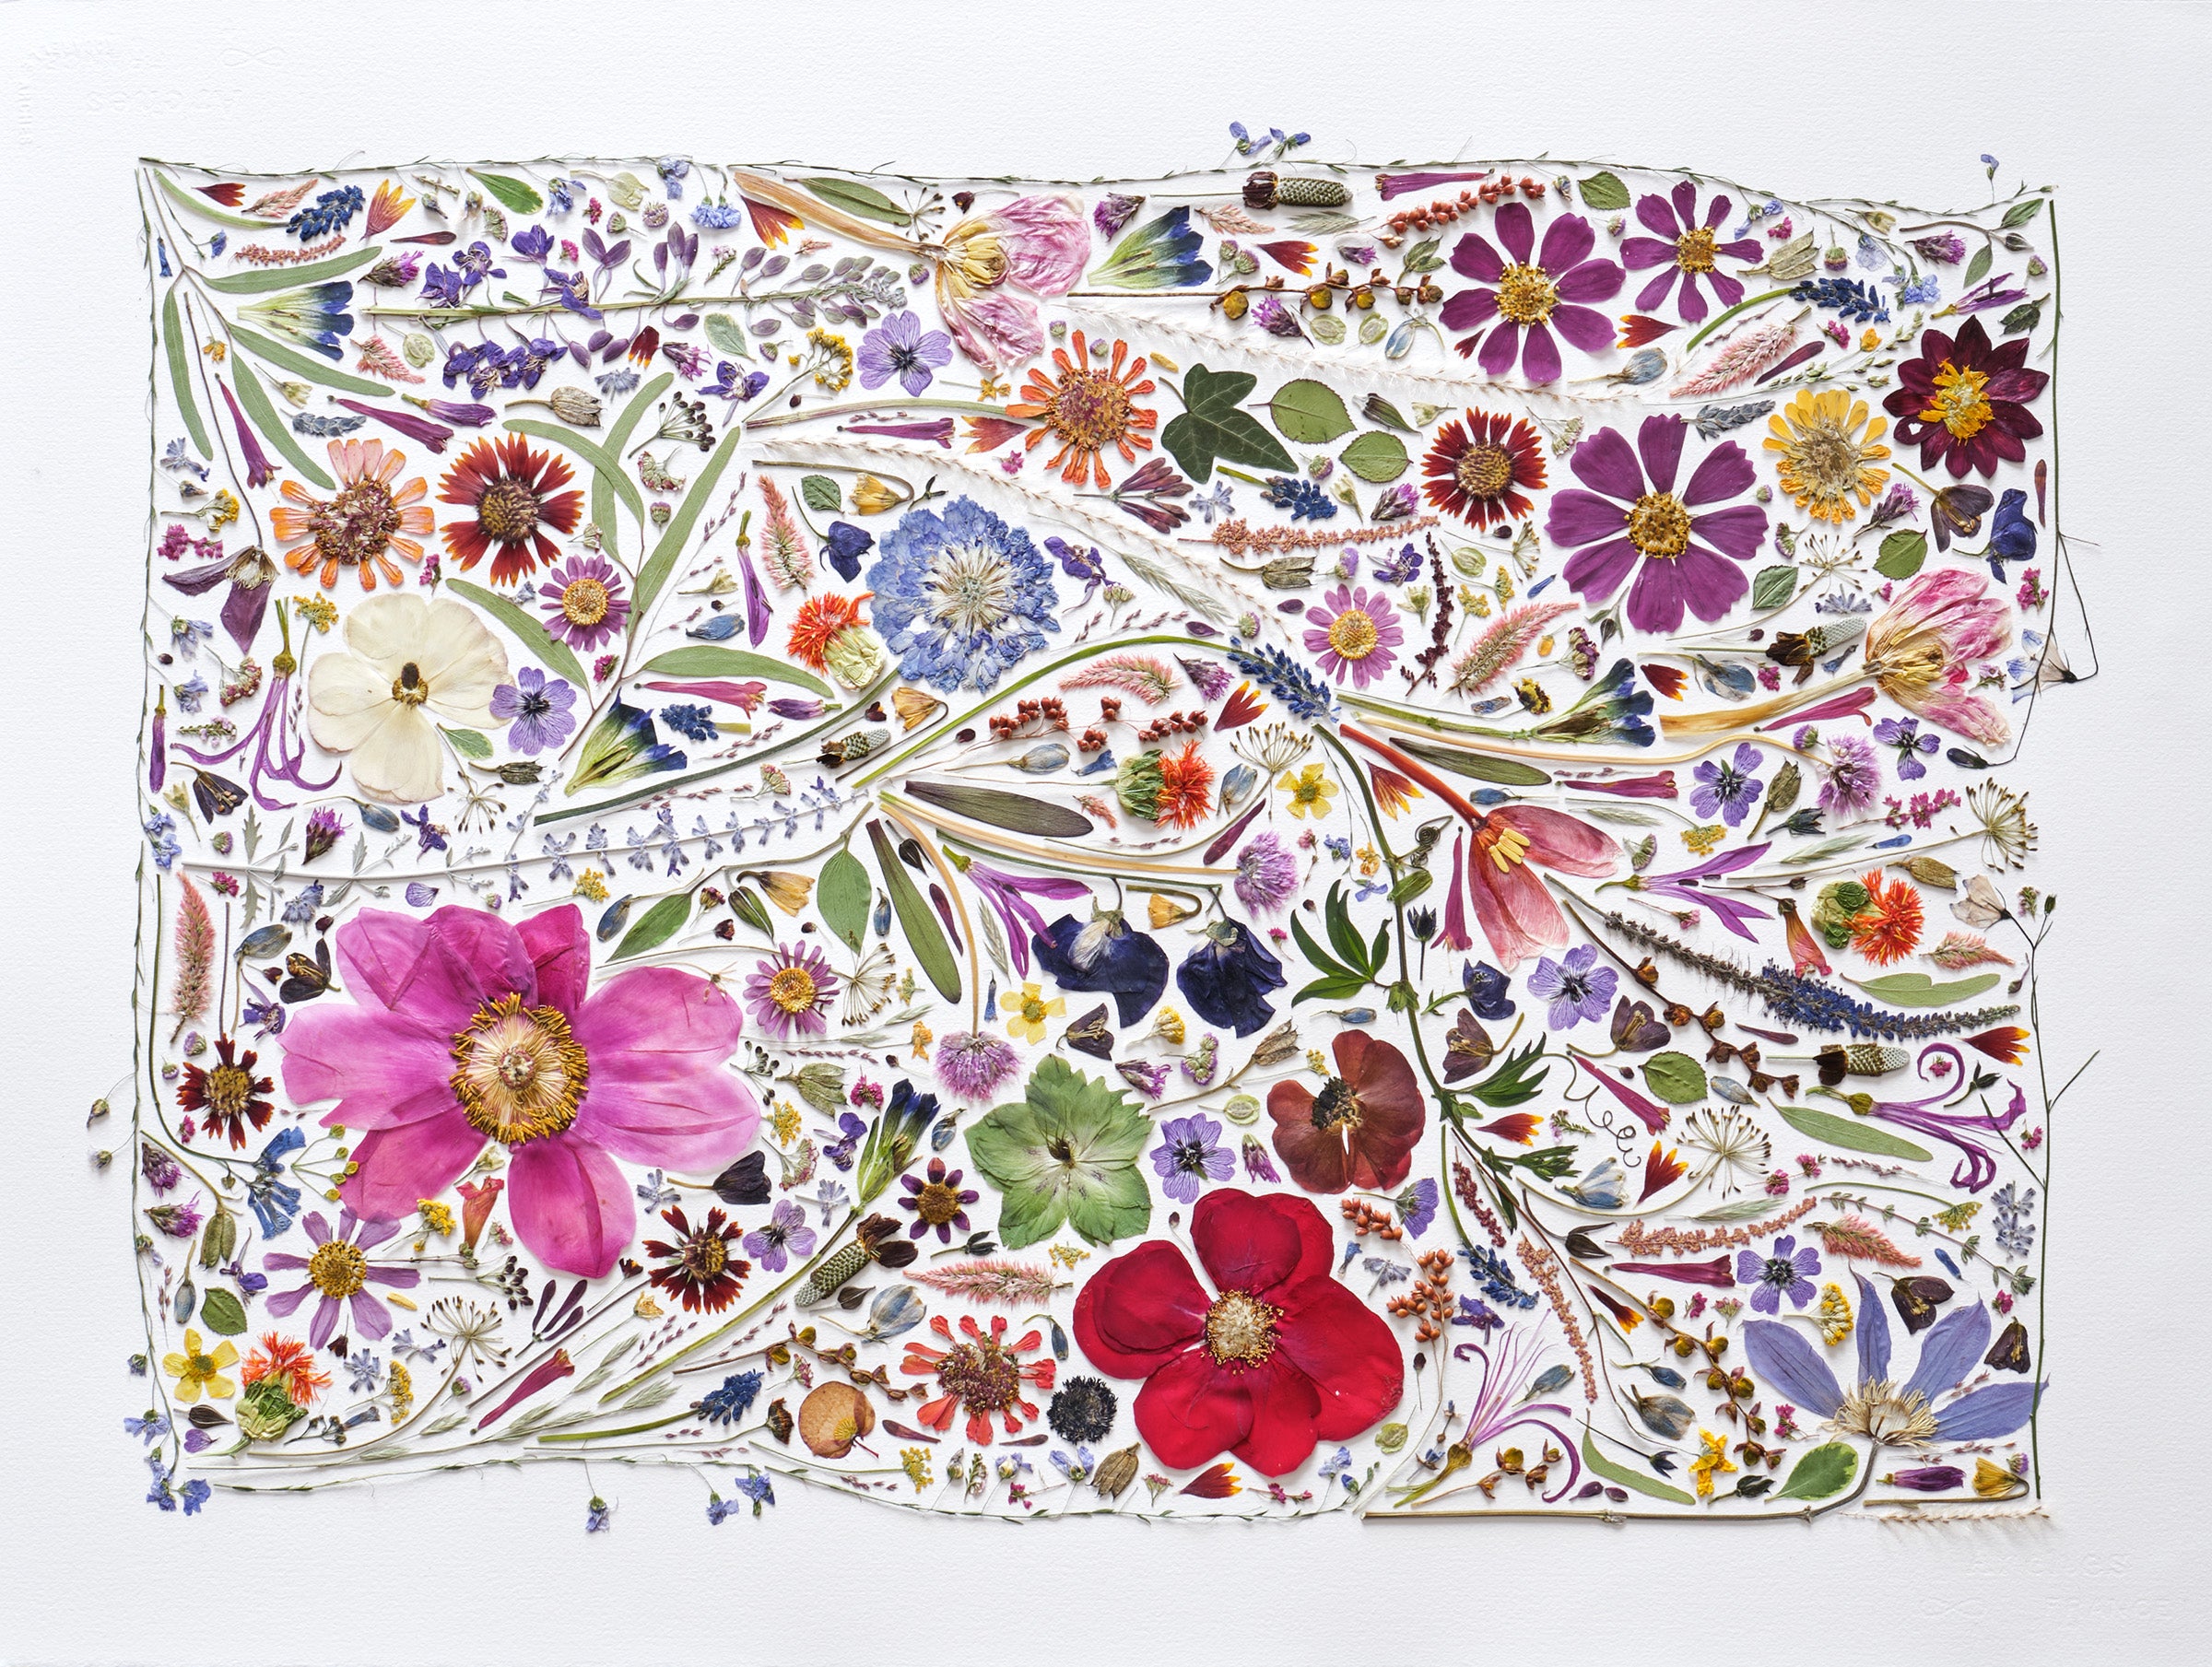 Colorful Spring flowers that have been pressed and dried and then made into a beautiful organic art piece.